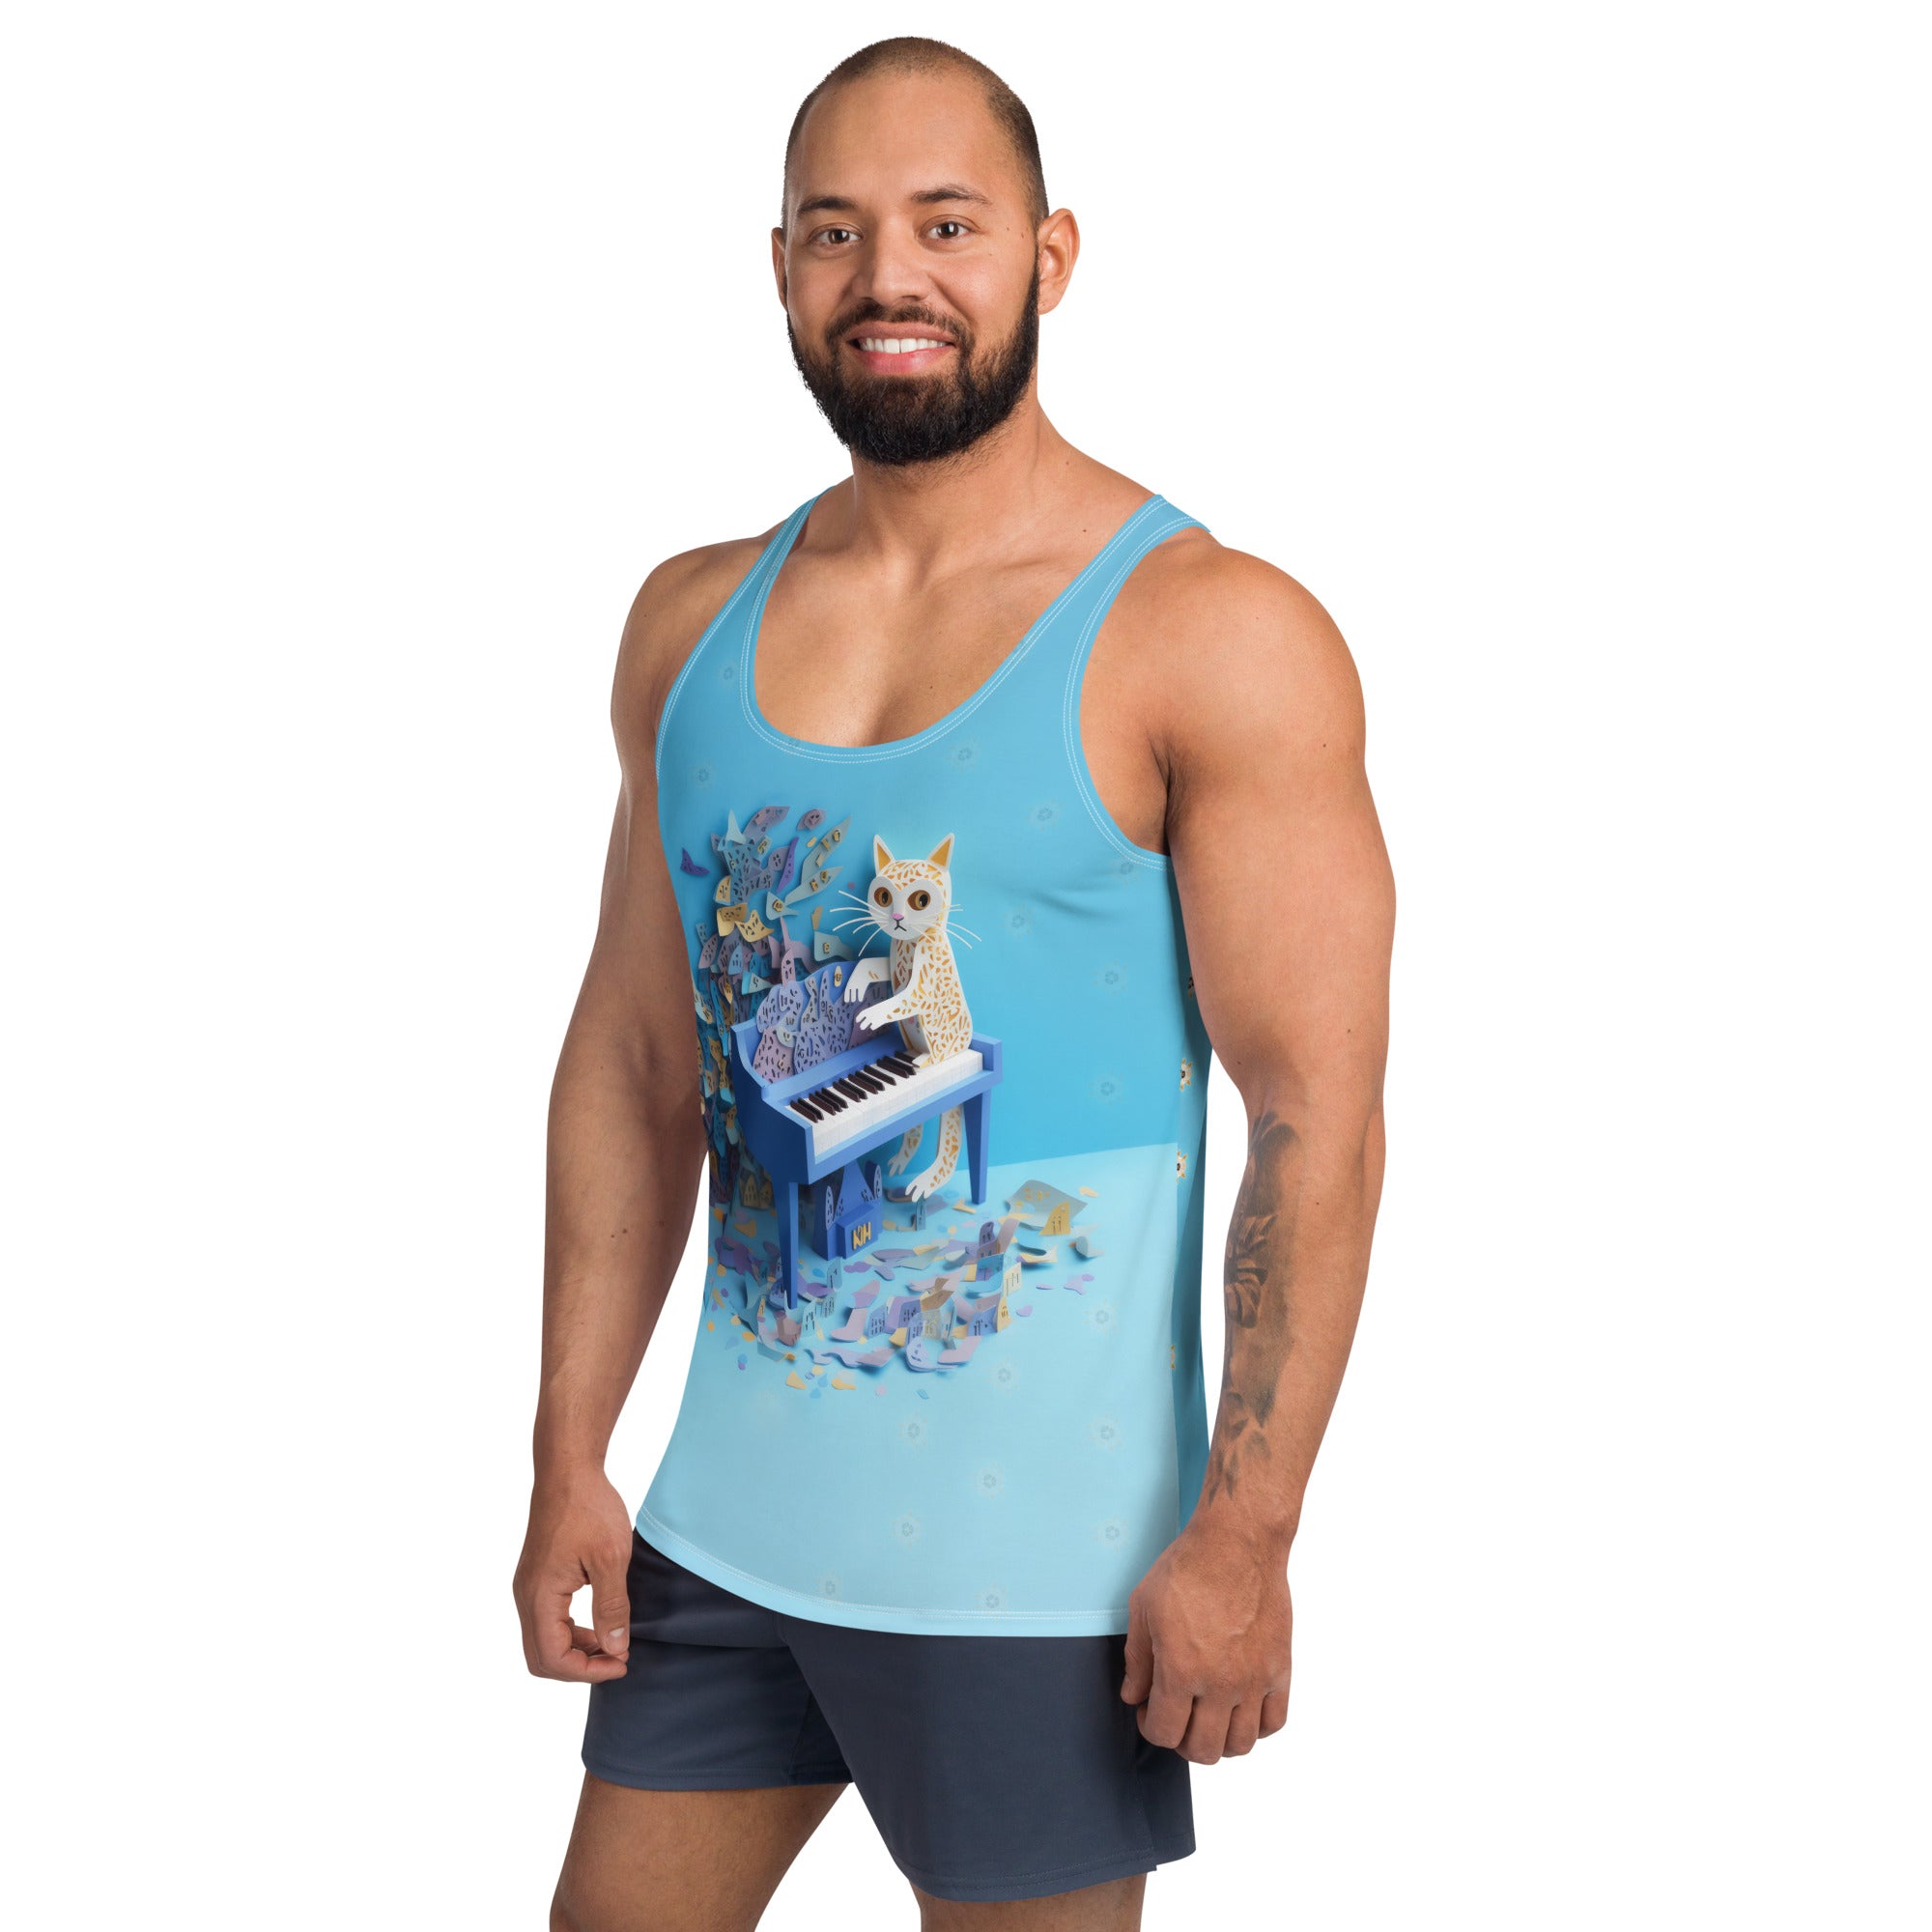 Men's tank top featuring Paper Wolf Howl graphic.